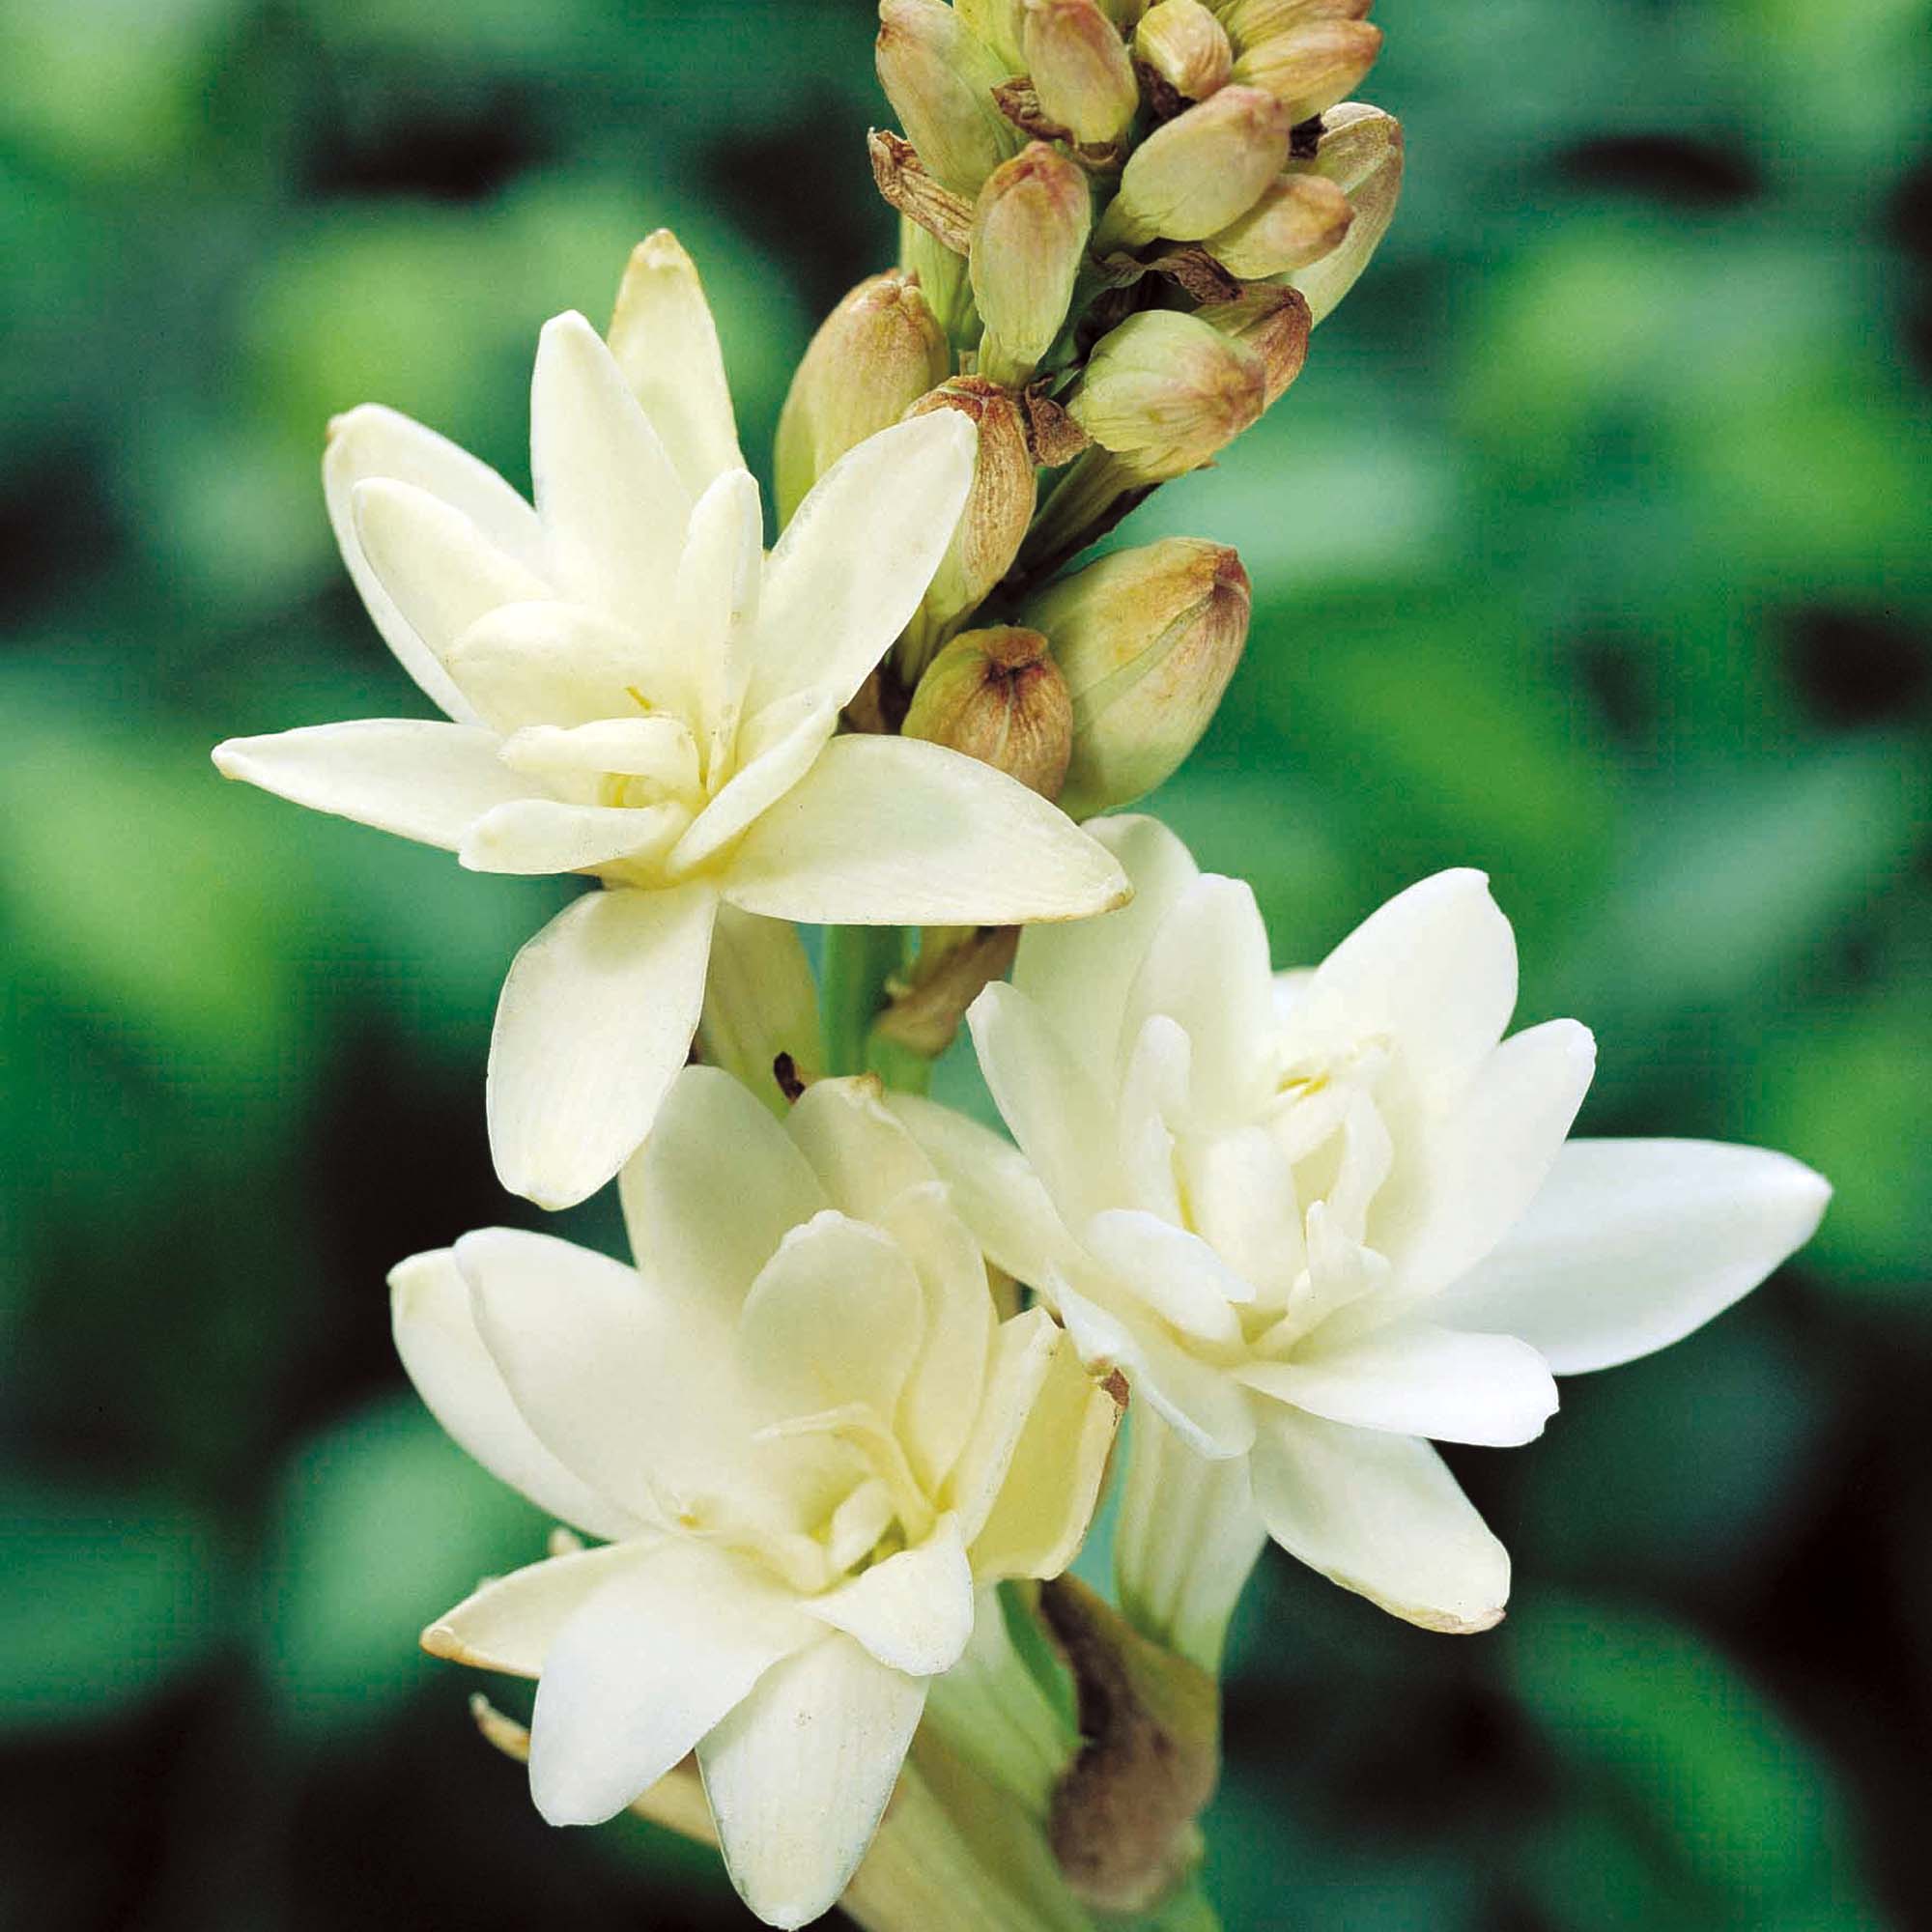 We provide pure Tuberose oil online at great prices